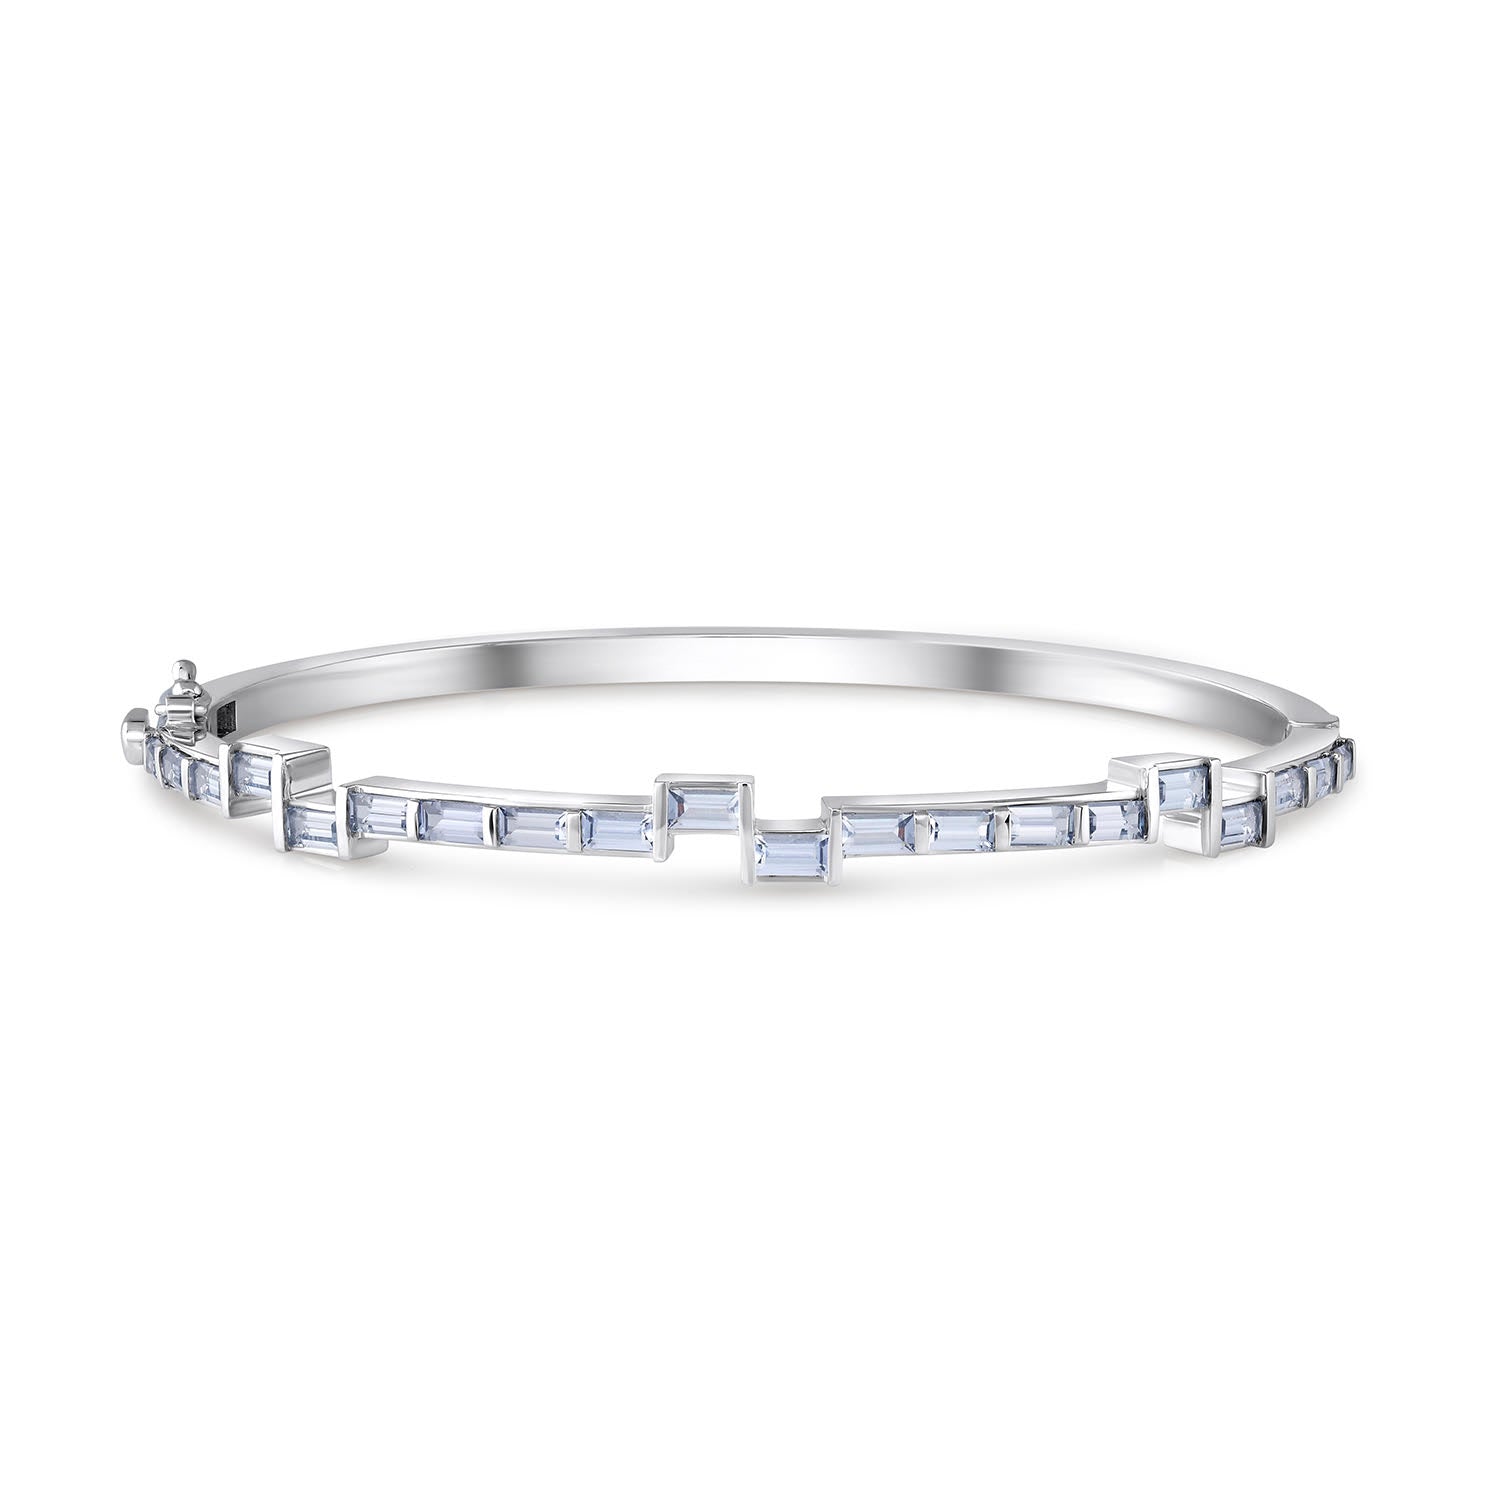 Blue Spinel Chasm Baguette Hinged Bracelet by Meredith Young